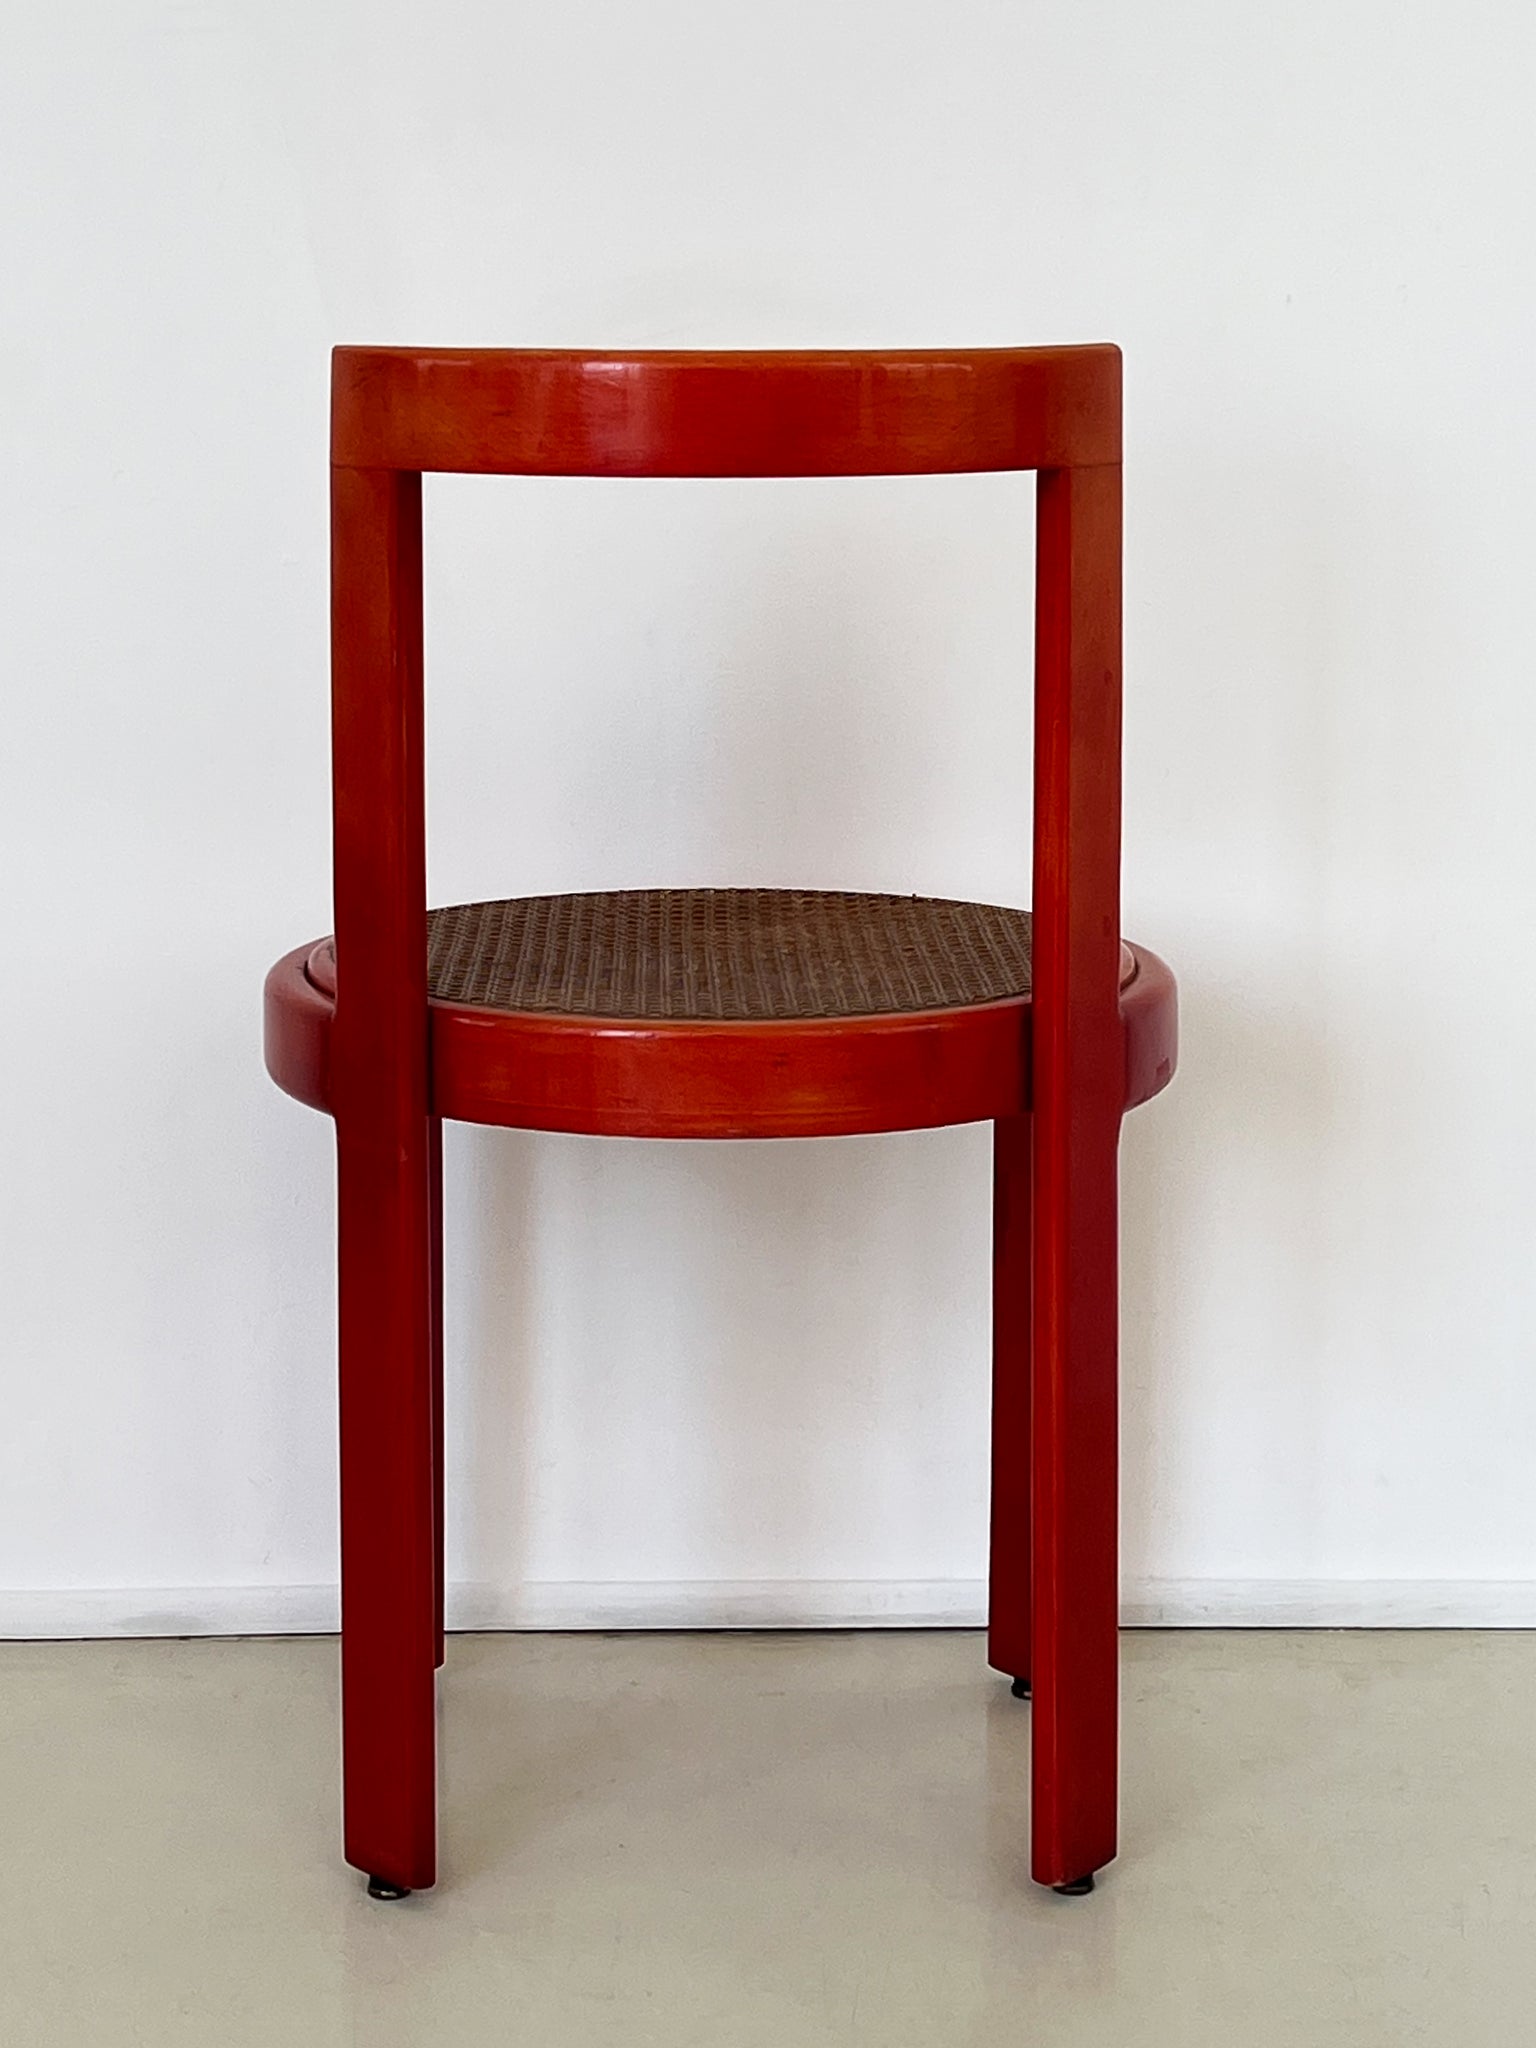 1970s Orange Dining Chair with Cane Seat